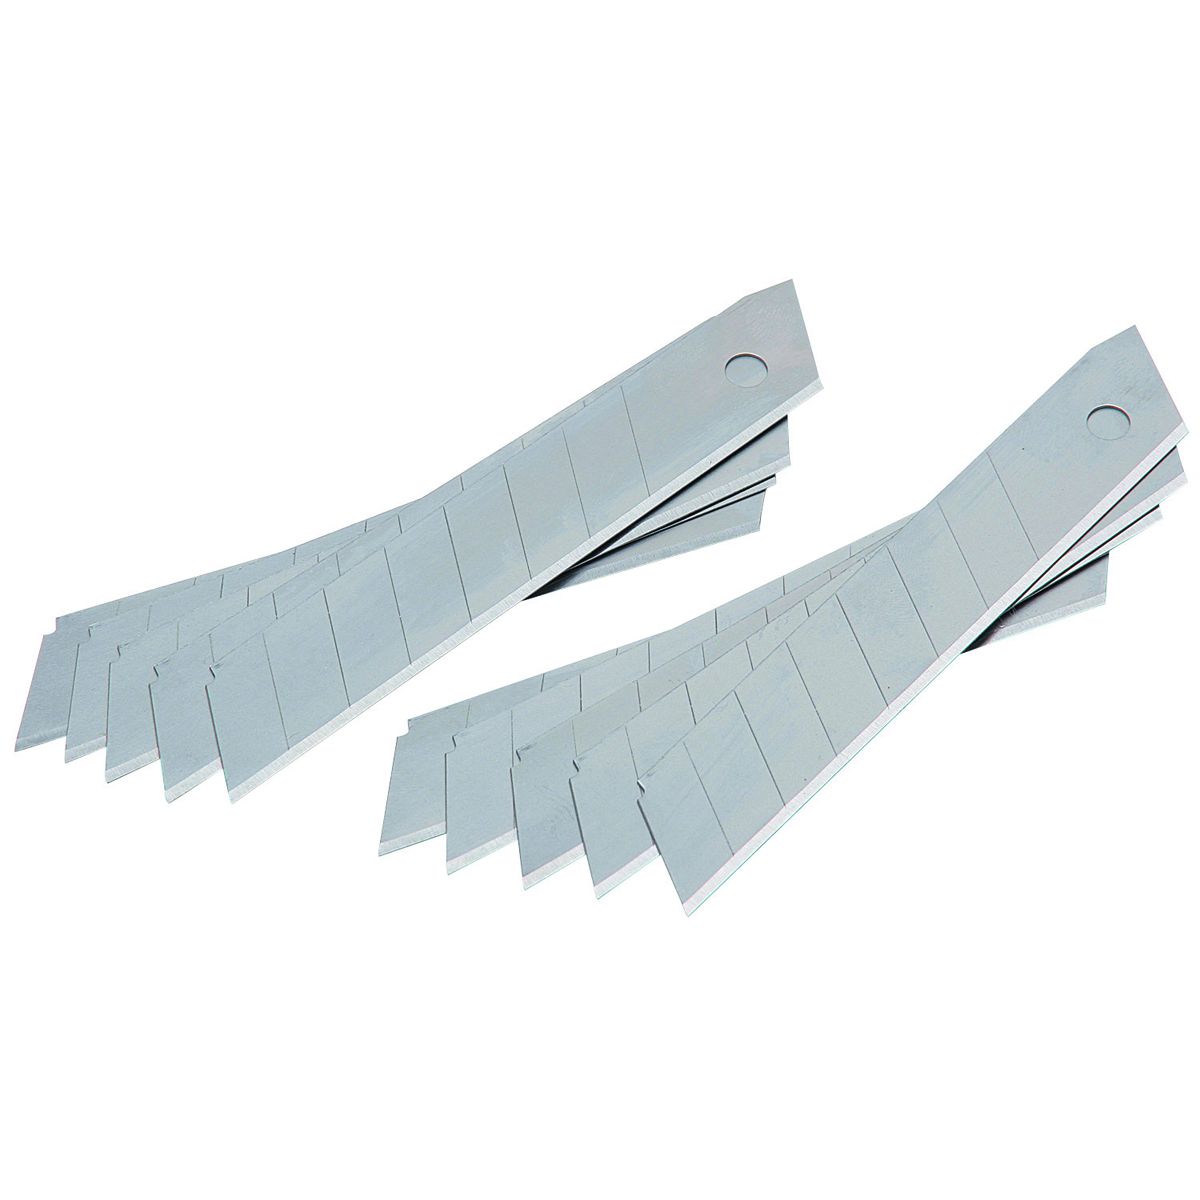 GORDON Pack of 10 18mm Replacement Snap Blades